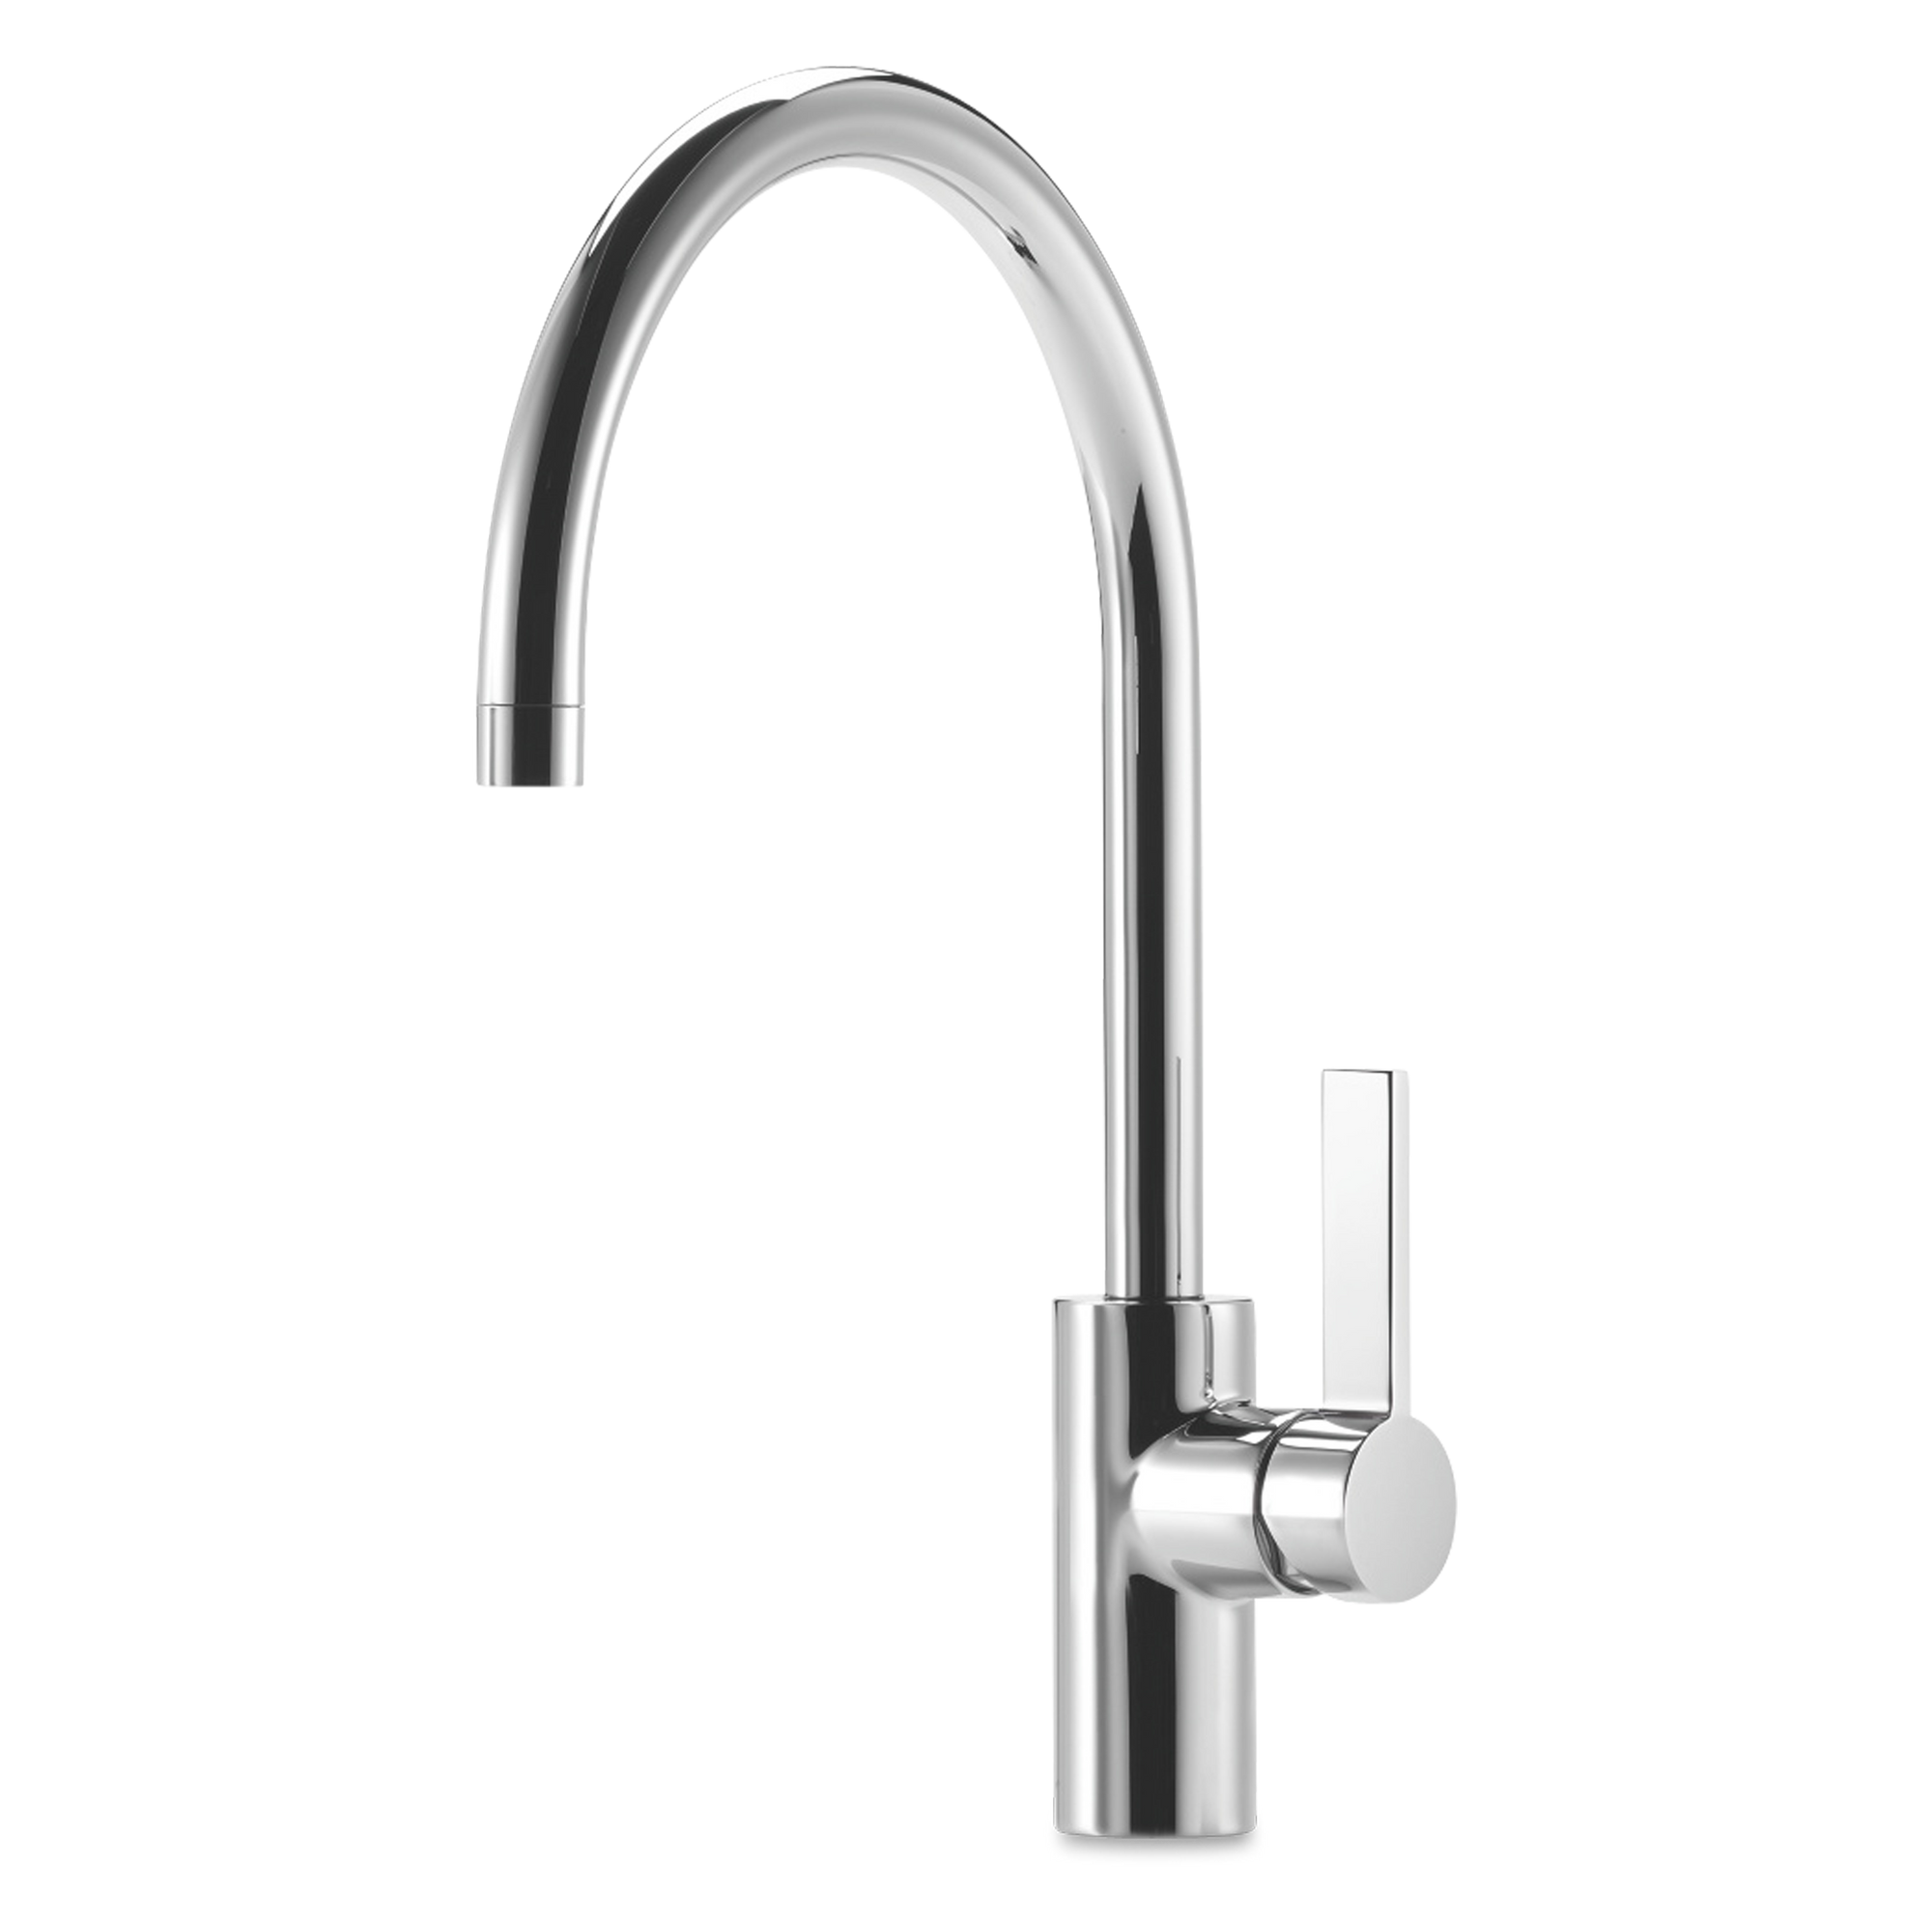 Bring some contemporary glamour to your kitchen with this seamless faucet.